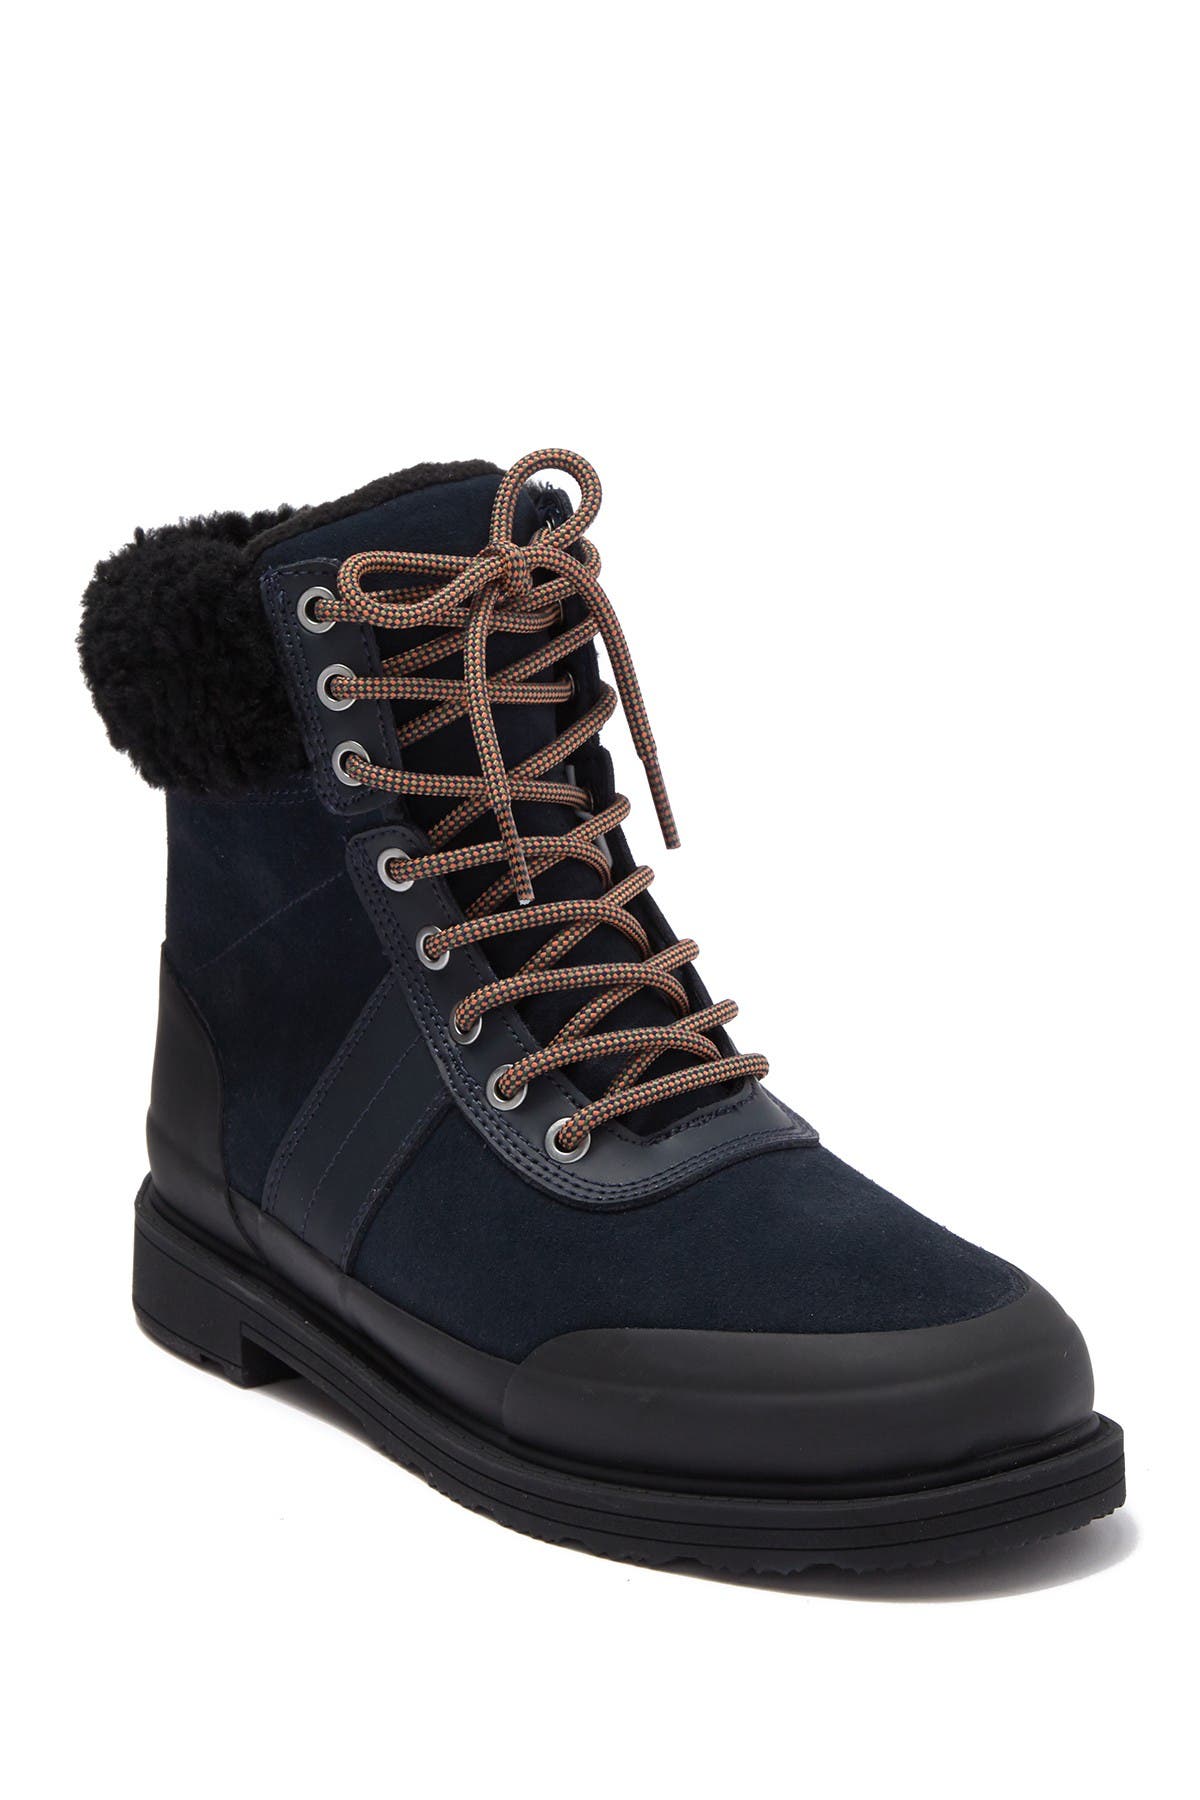 hunter insulated leather commando boots